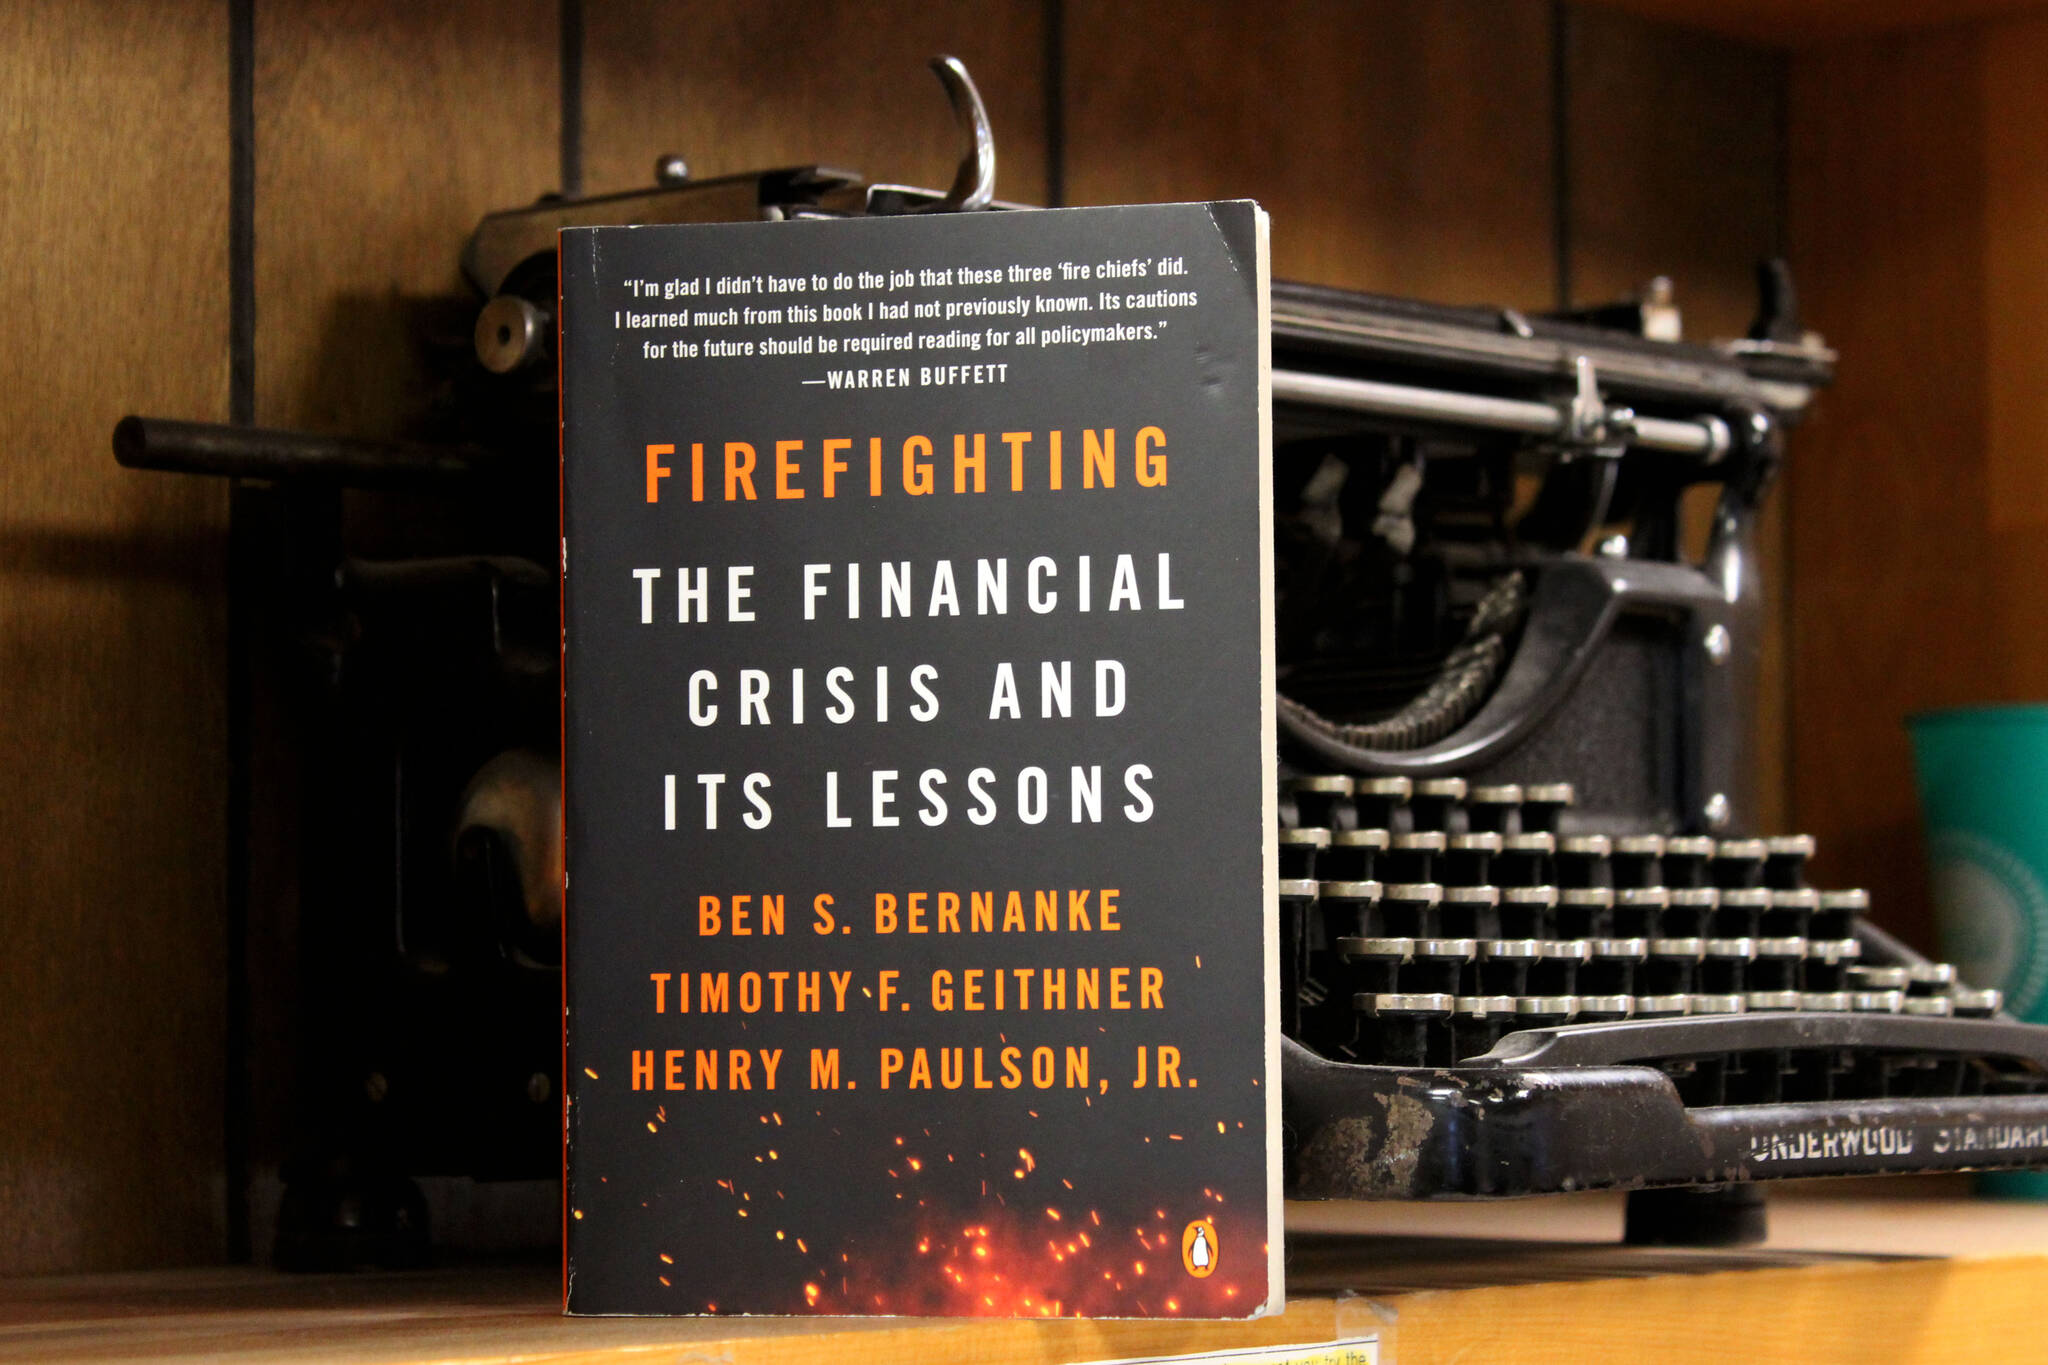 A copy of “Firefighting: the Financial Crisis and Its Lessons” rests against a typewriter on Wednesday, May 4, 2022, in Kenai, Alaska. (Ashlyn O’Hara/Peninsula Clarion)